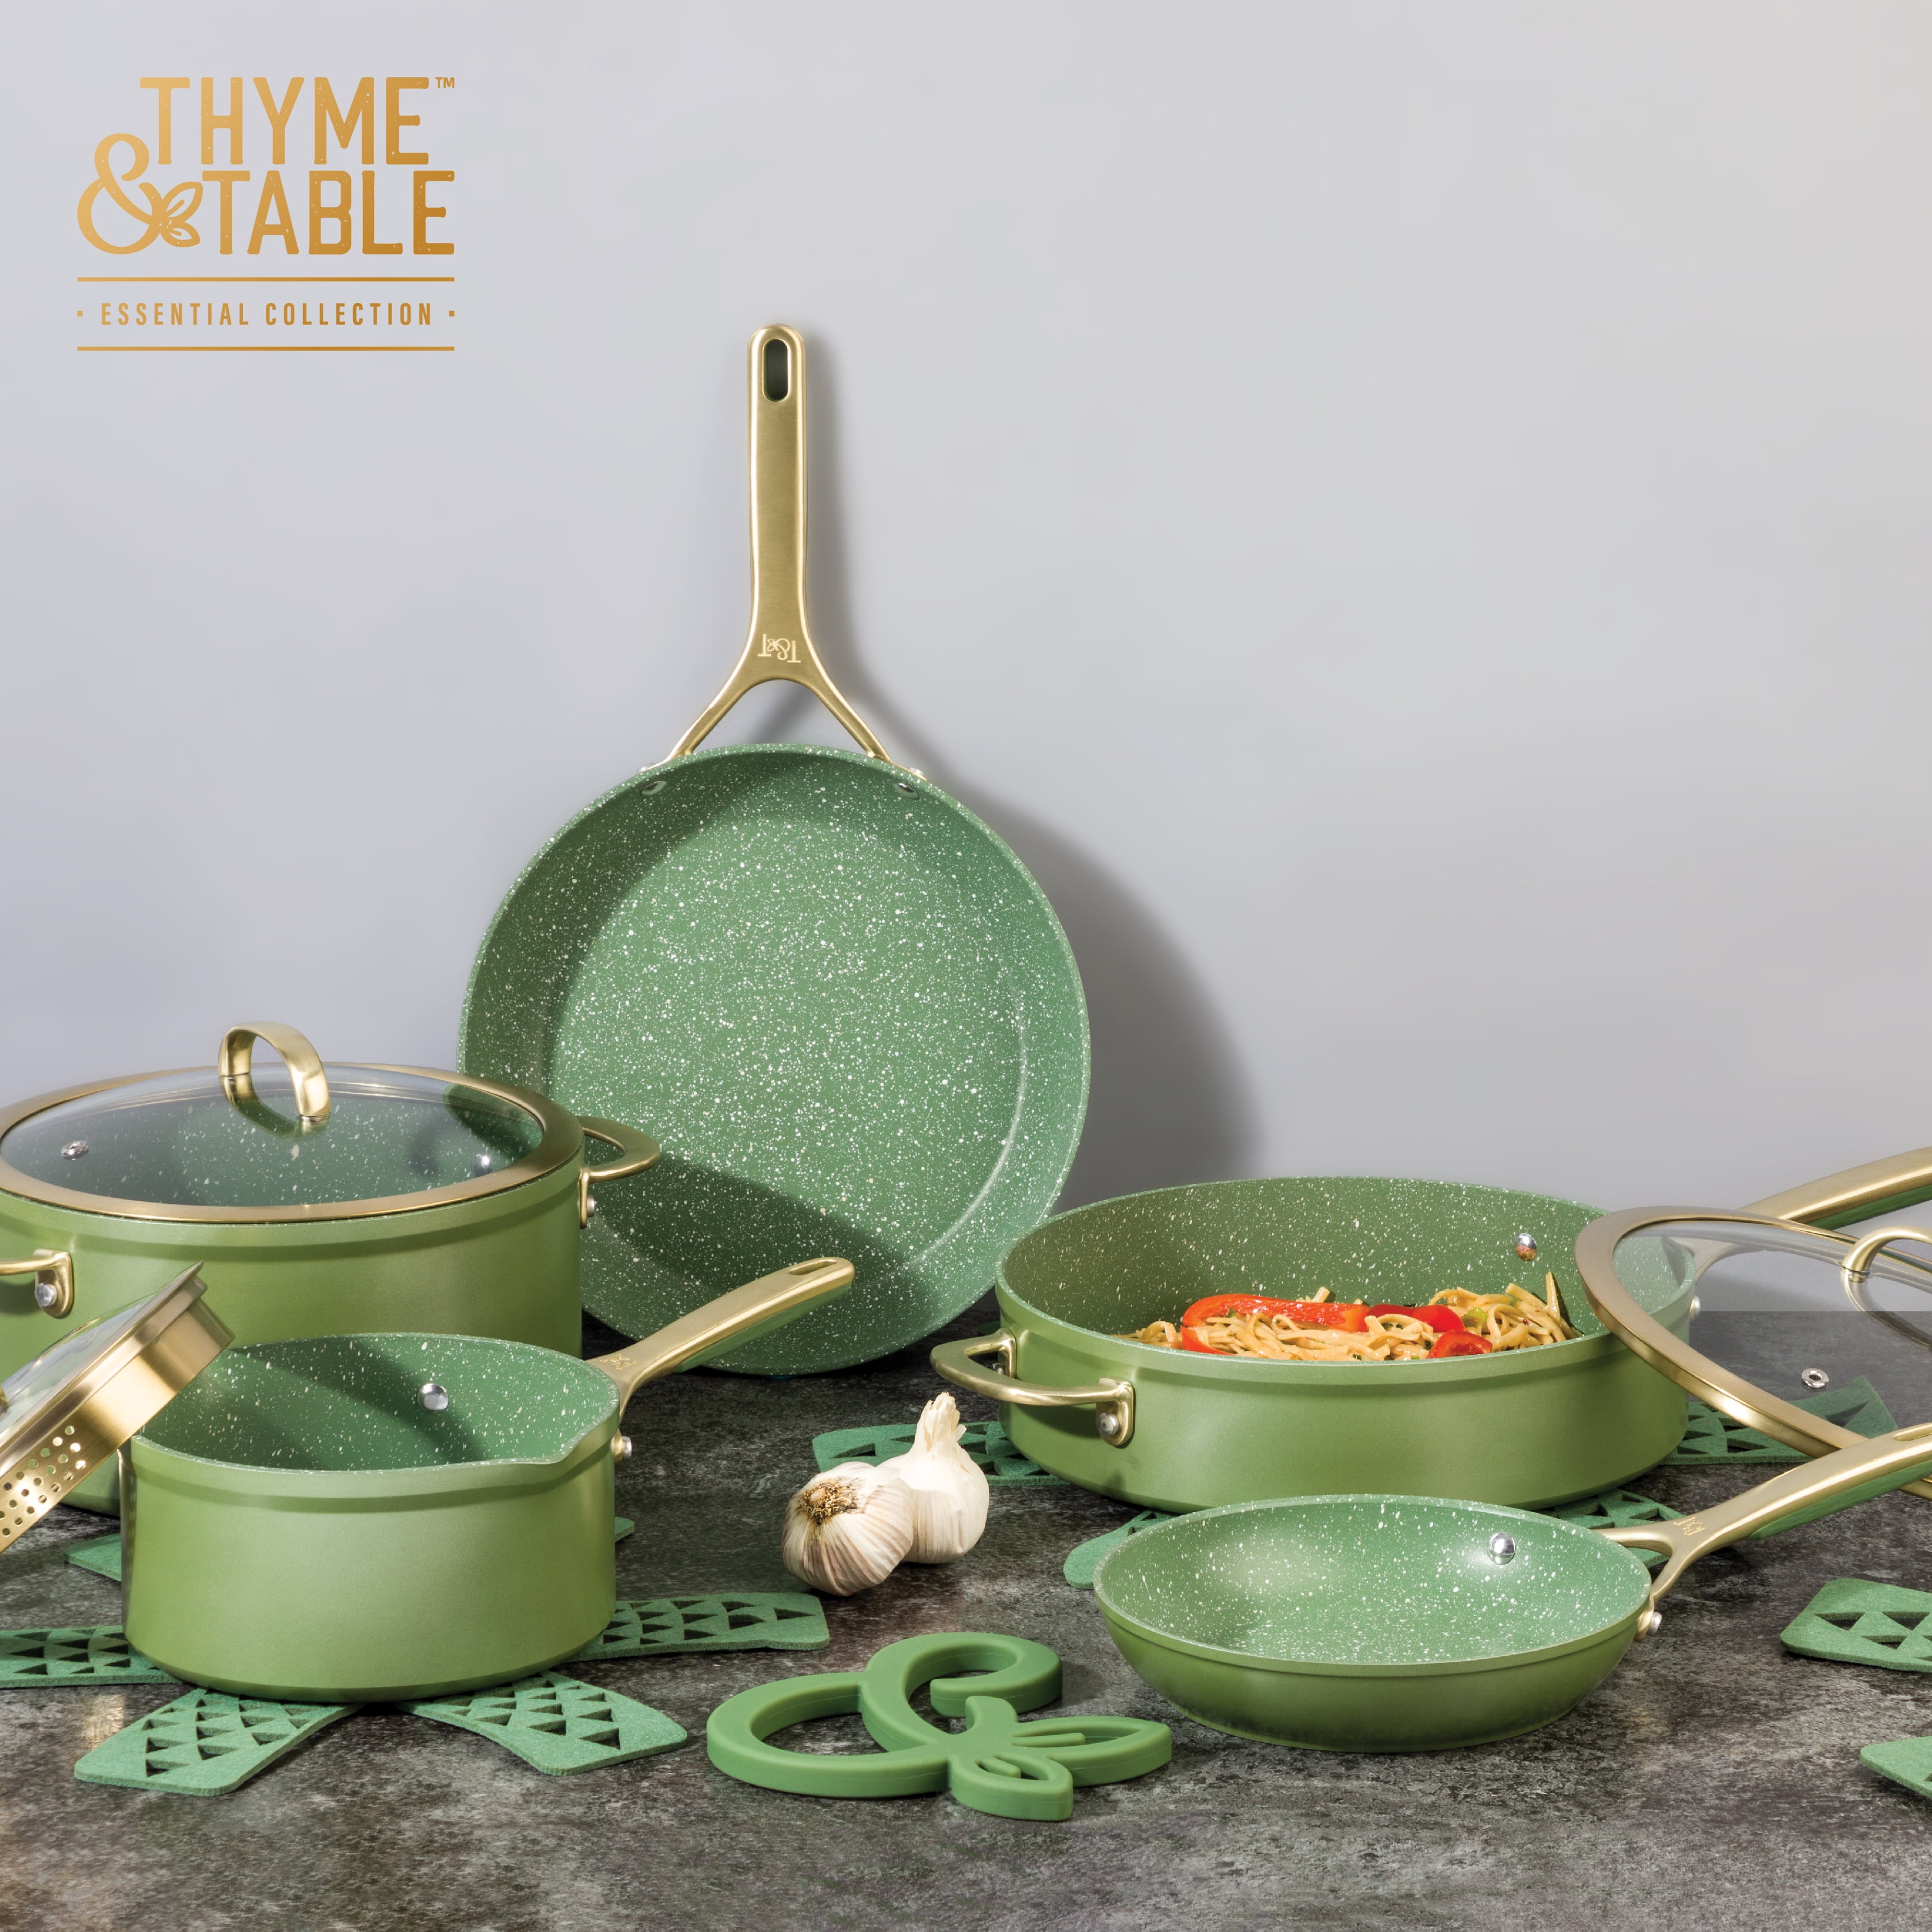 Walmart Corinth - Get this 28-piece Thyme & Table cookware and